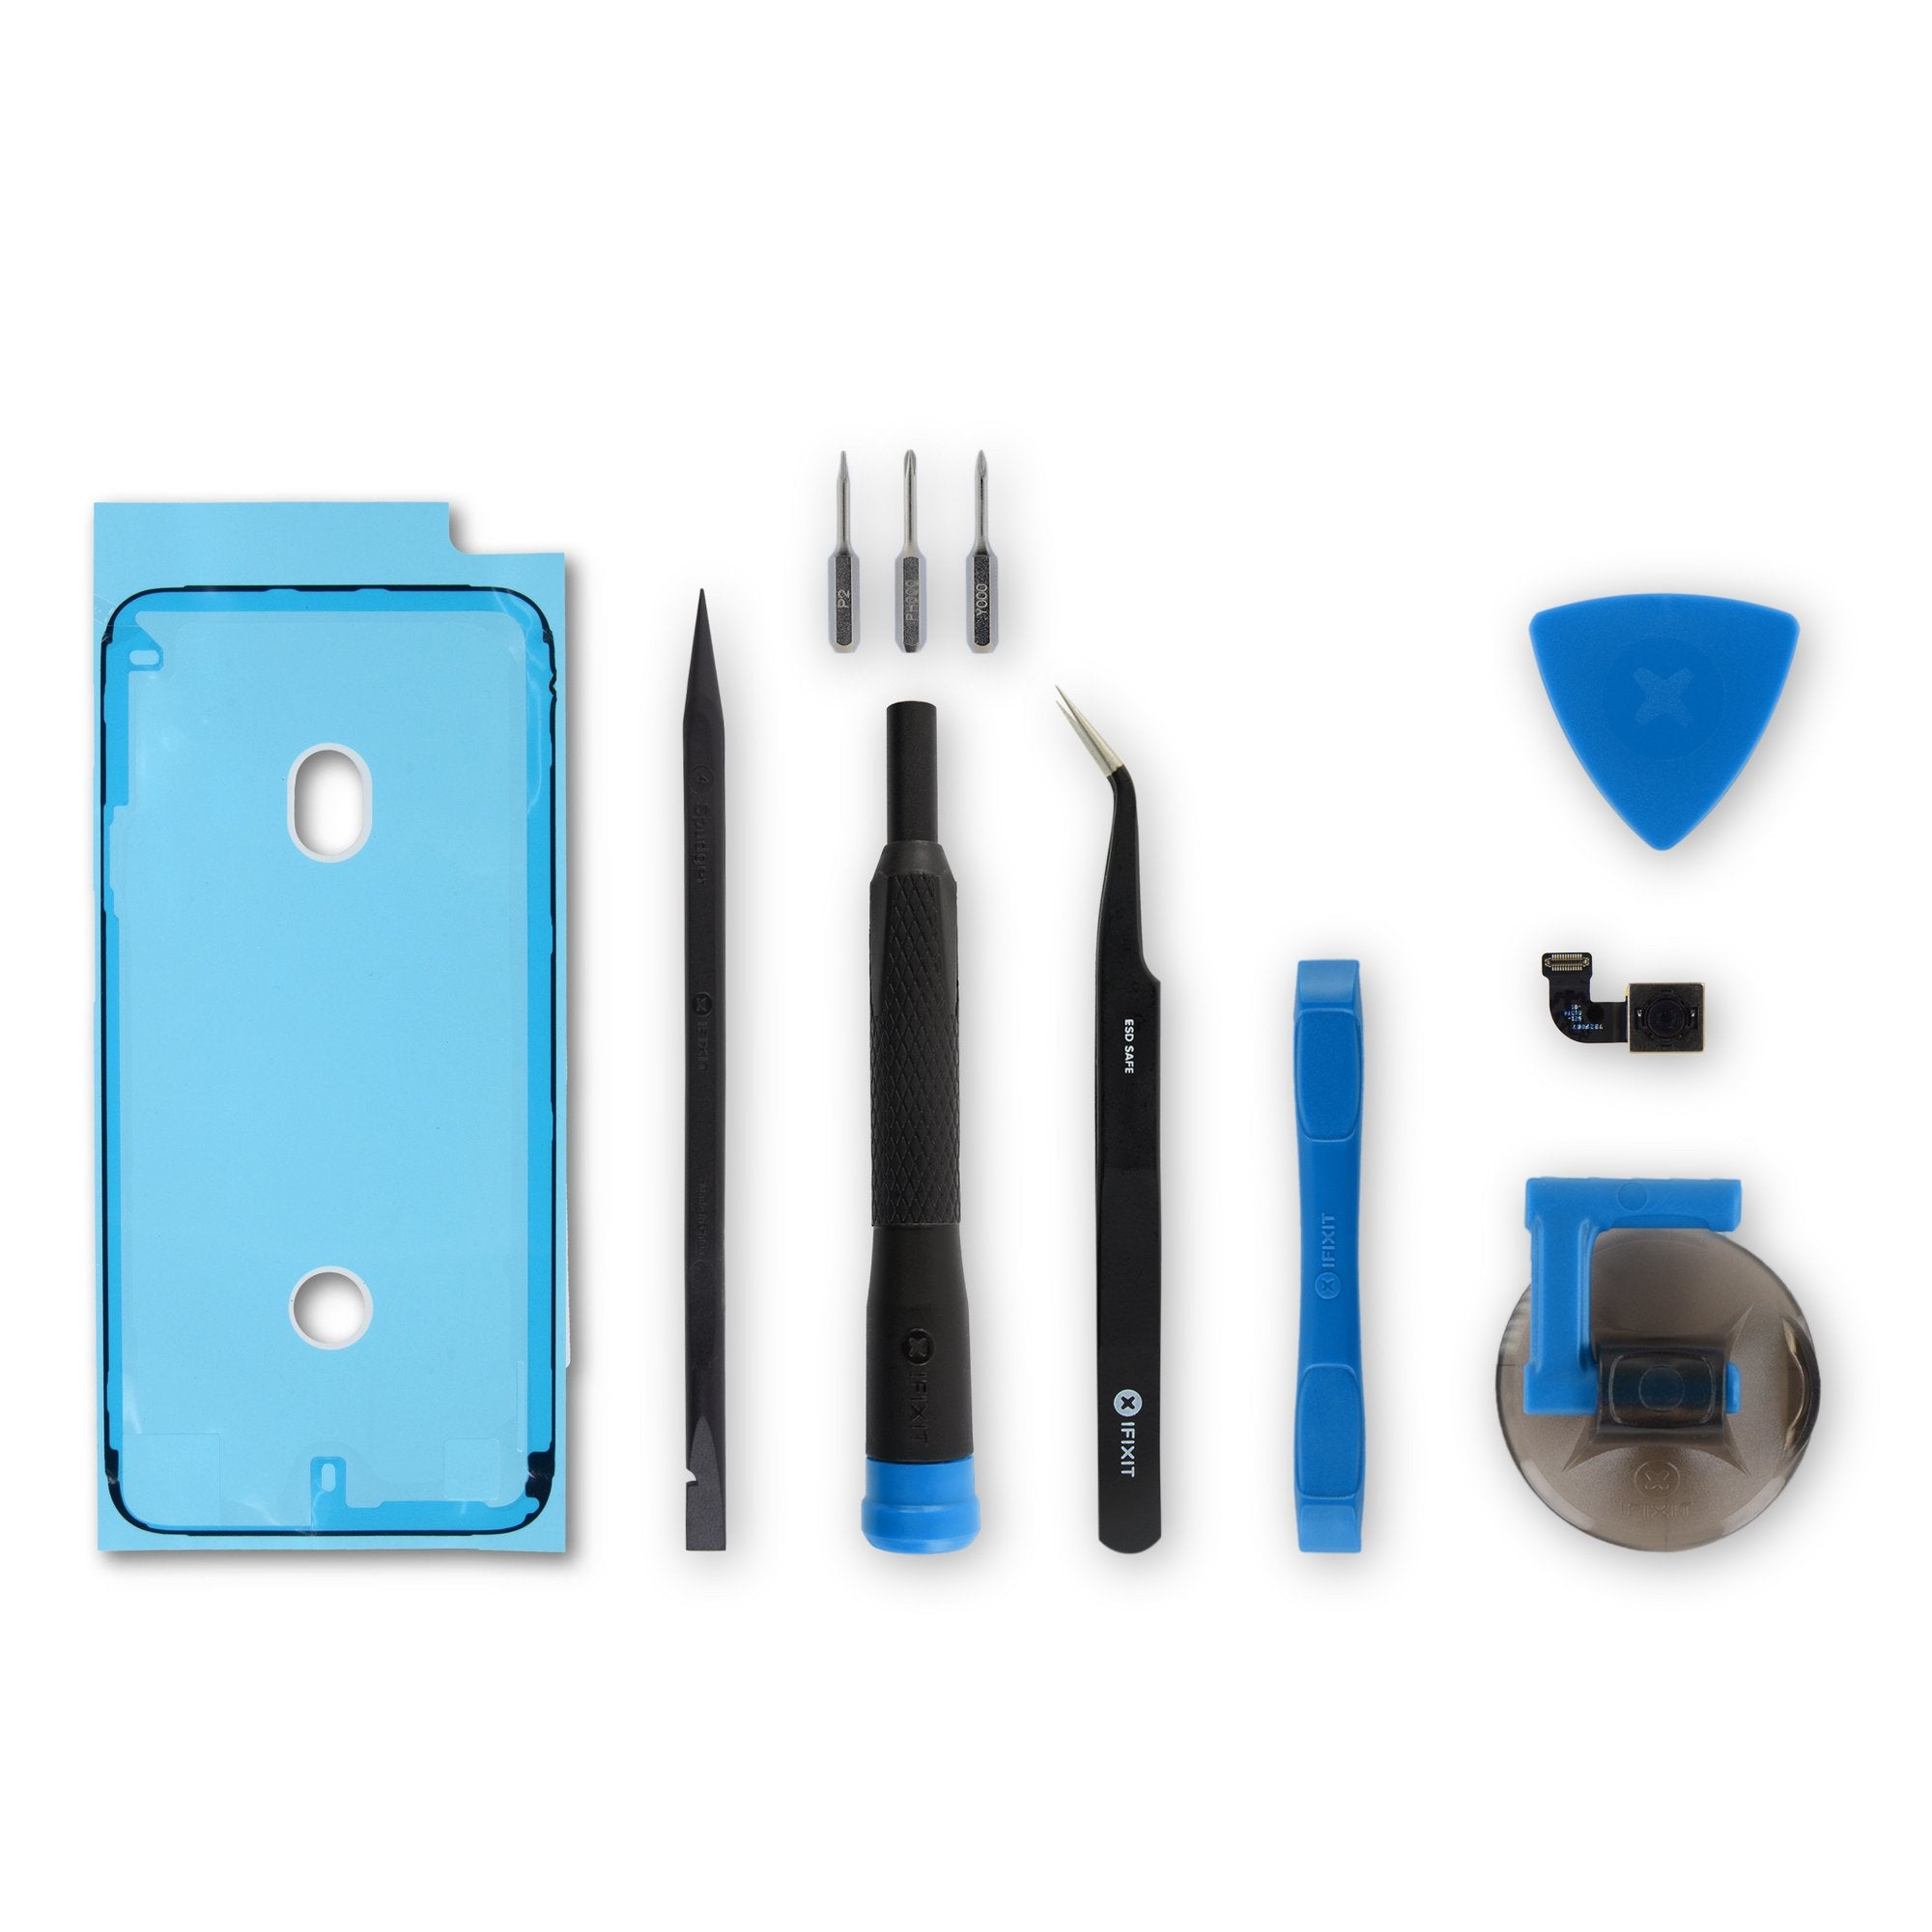 iPhone 8 Parts – iFixit Store